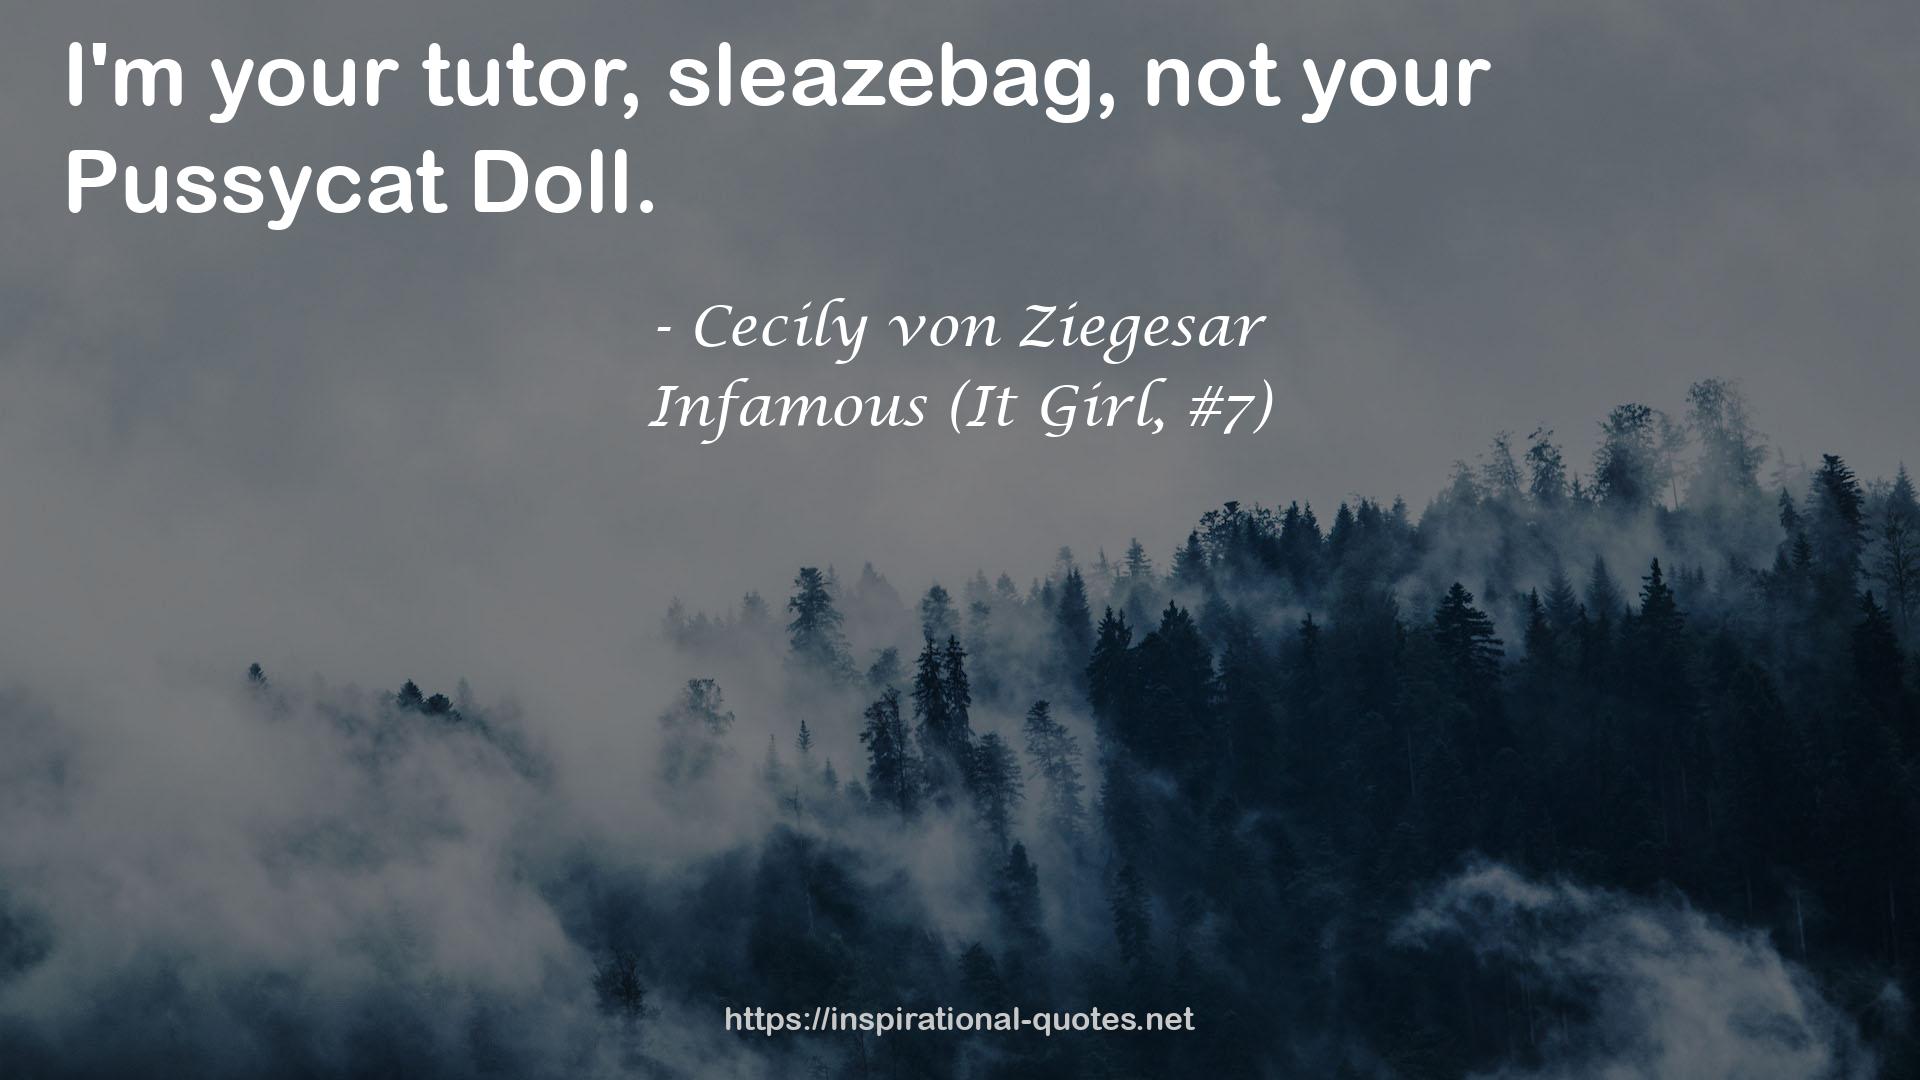 Infamous (It Girl, #7) QUOTES